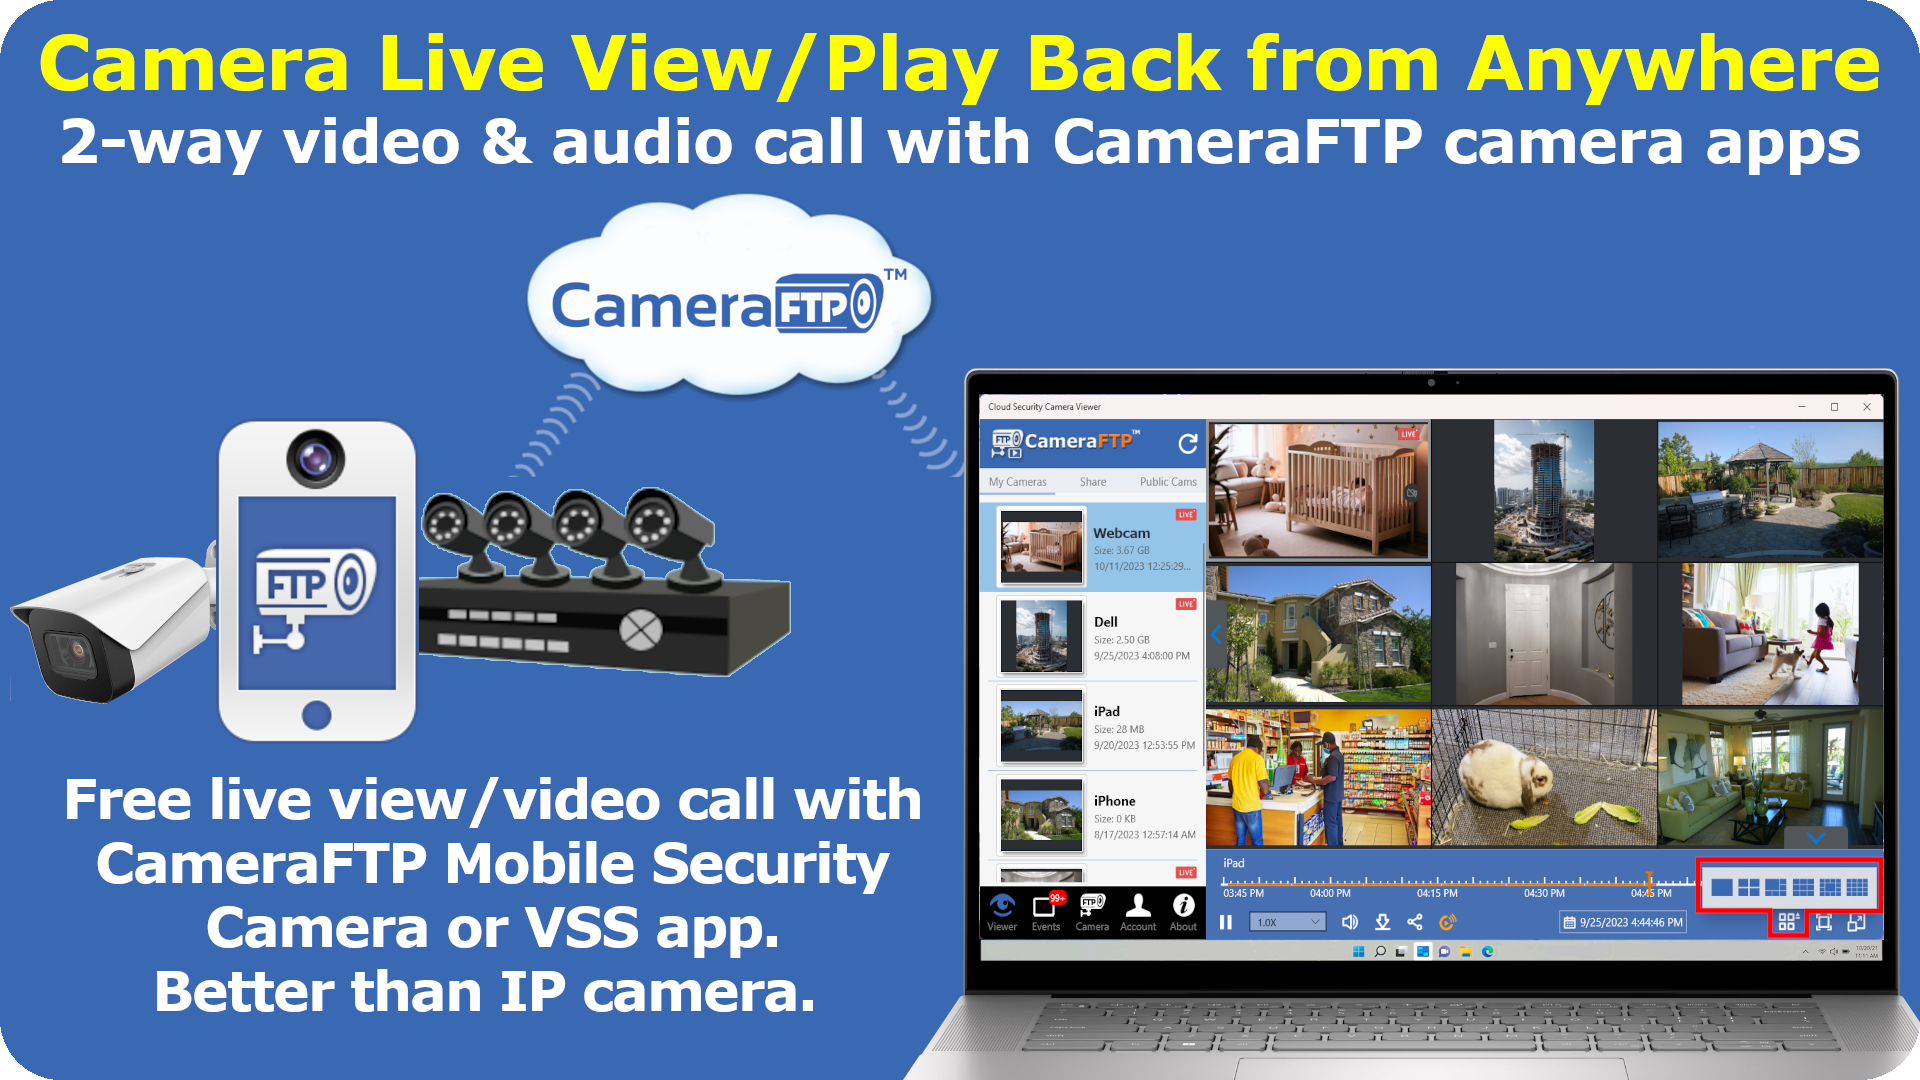 Live view or play back IP cameras, DVRs, or CameraFTP virtual IP cameras. Supports free live view and 2-way video/audio call if using CameraFTP Mobile Security camera or VSS. You can use smartphone/tablet as IP camera.